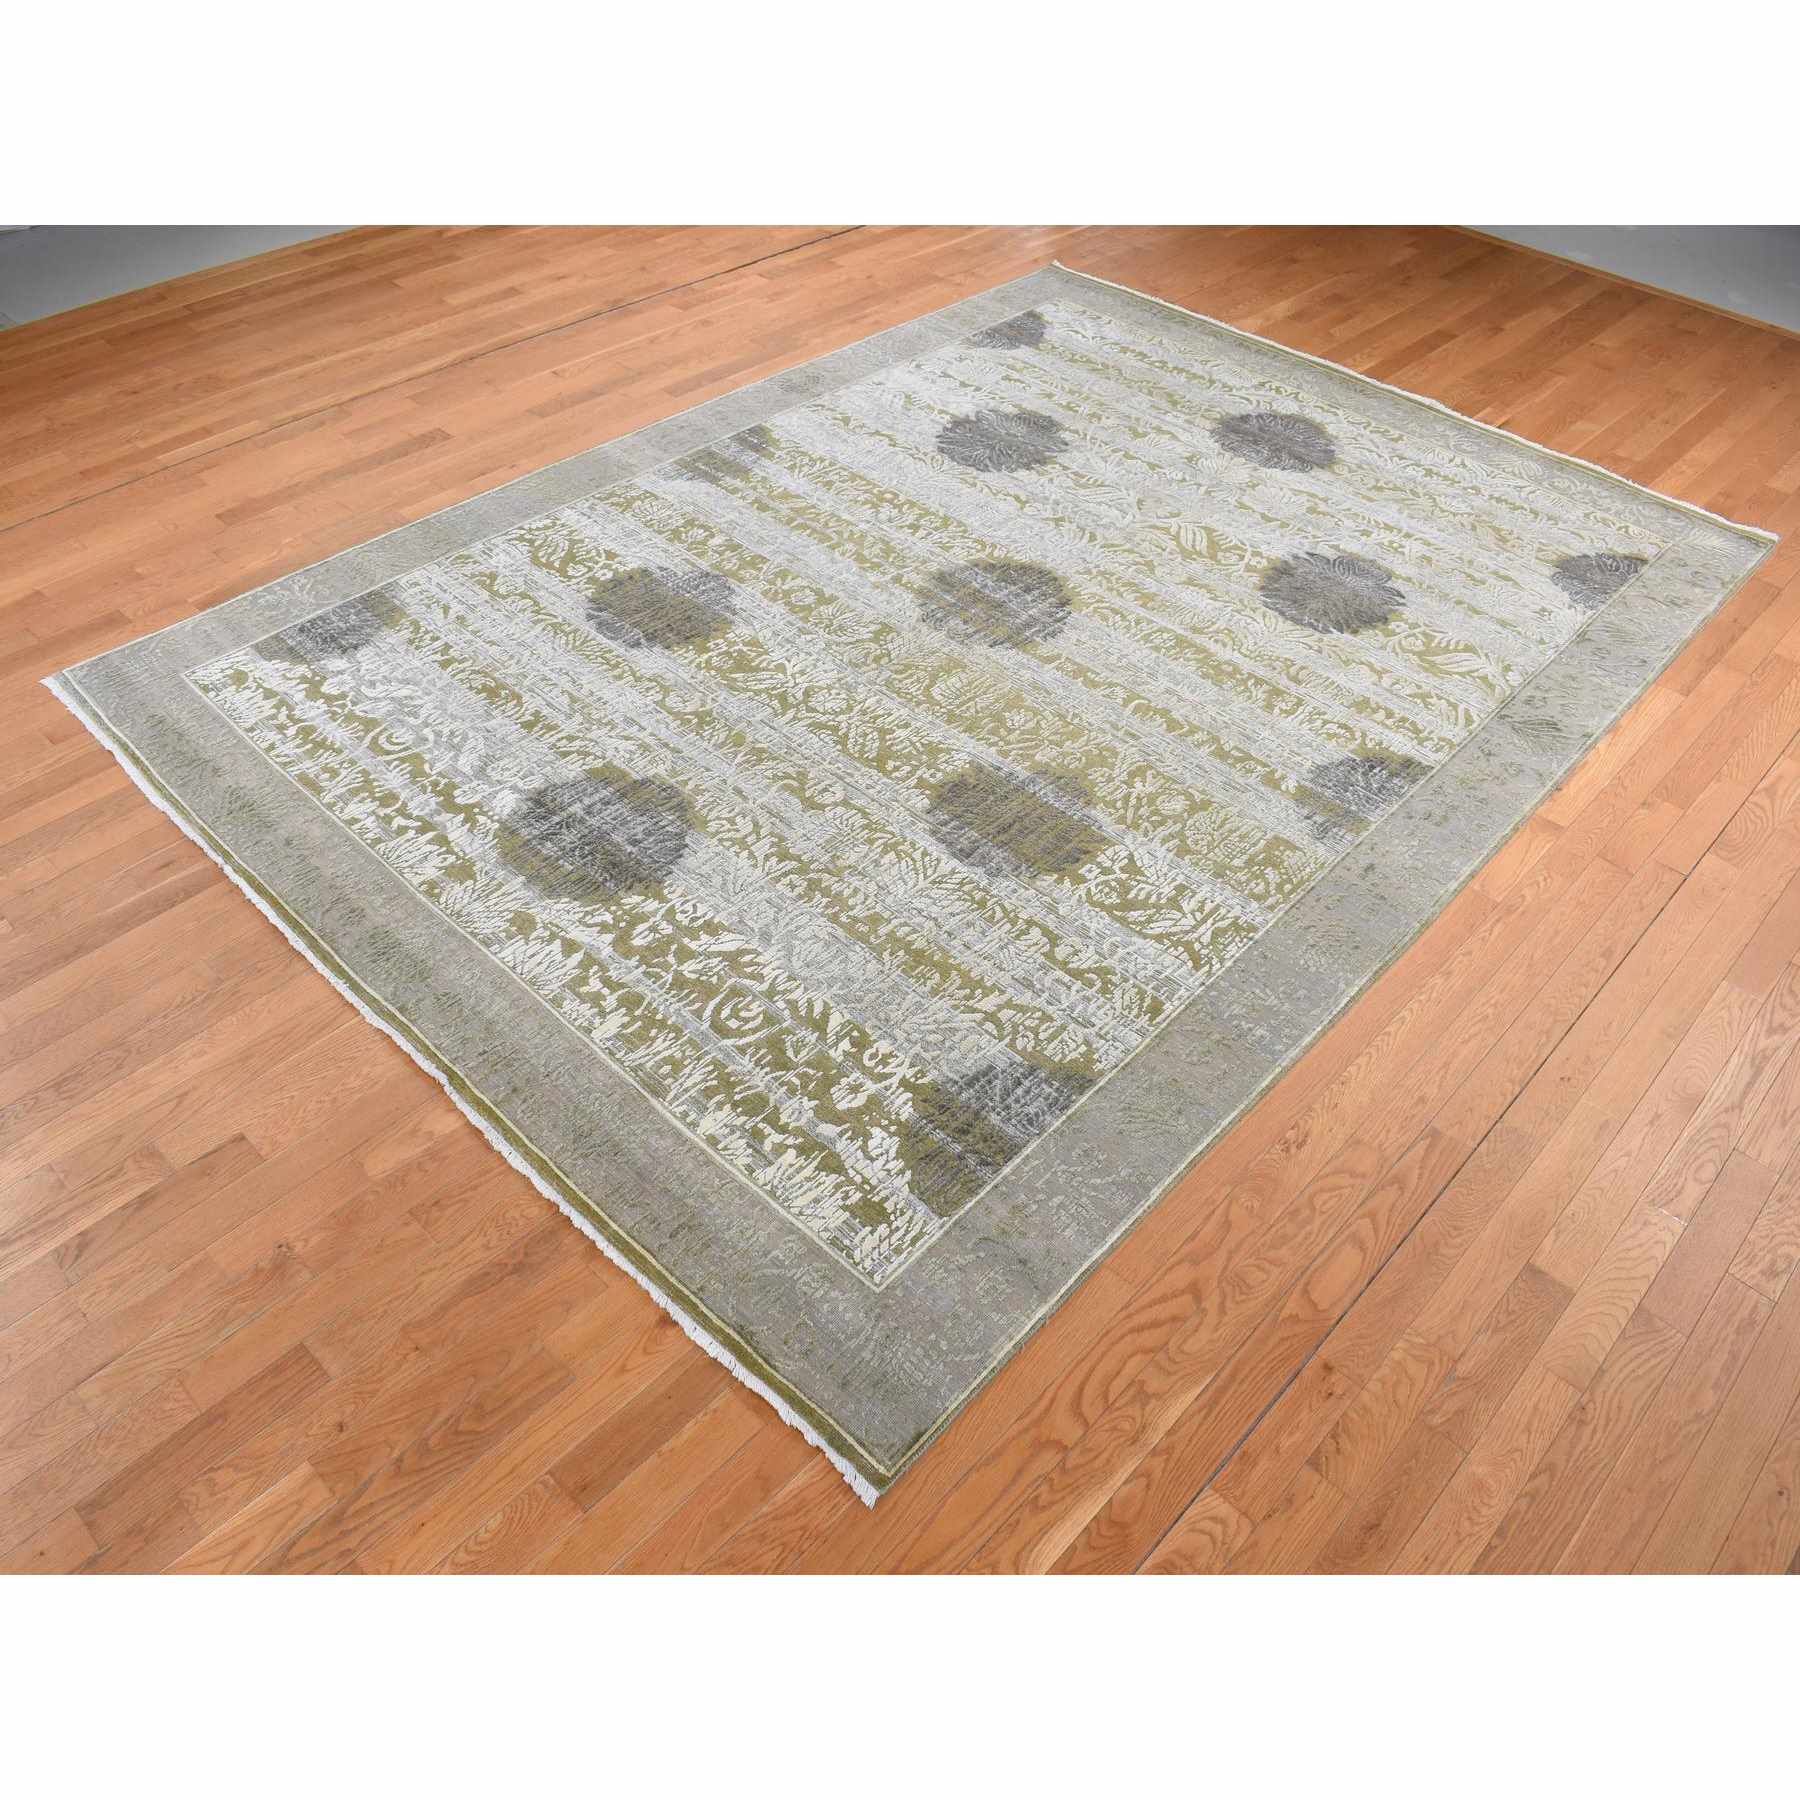 Wool-and-Silk-Hand-Knotted-Rug-435355